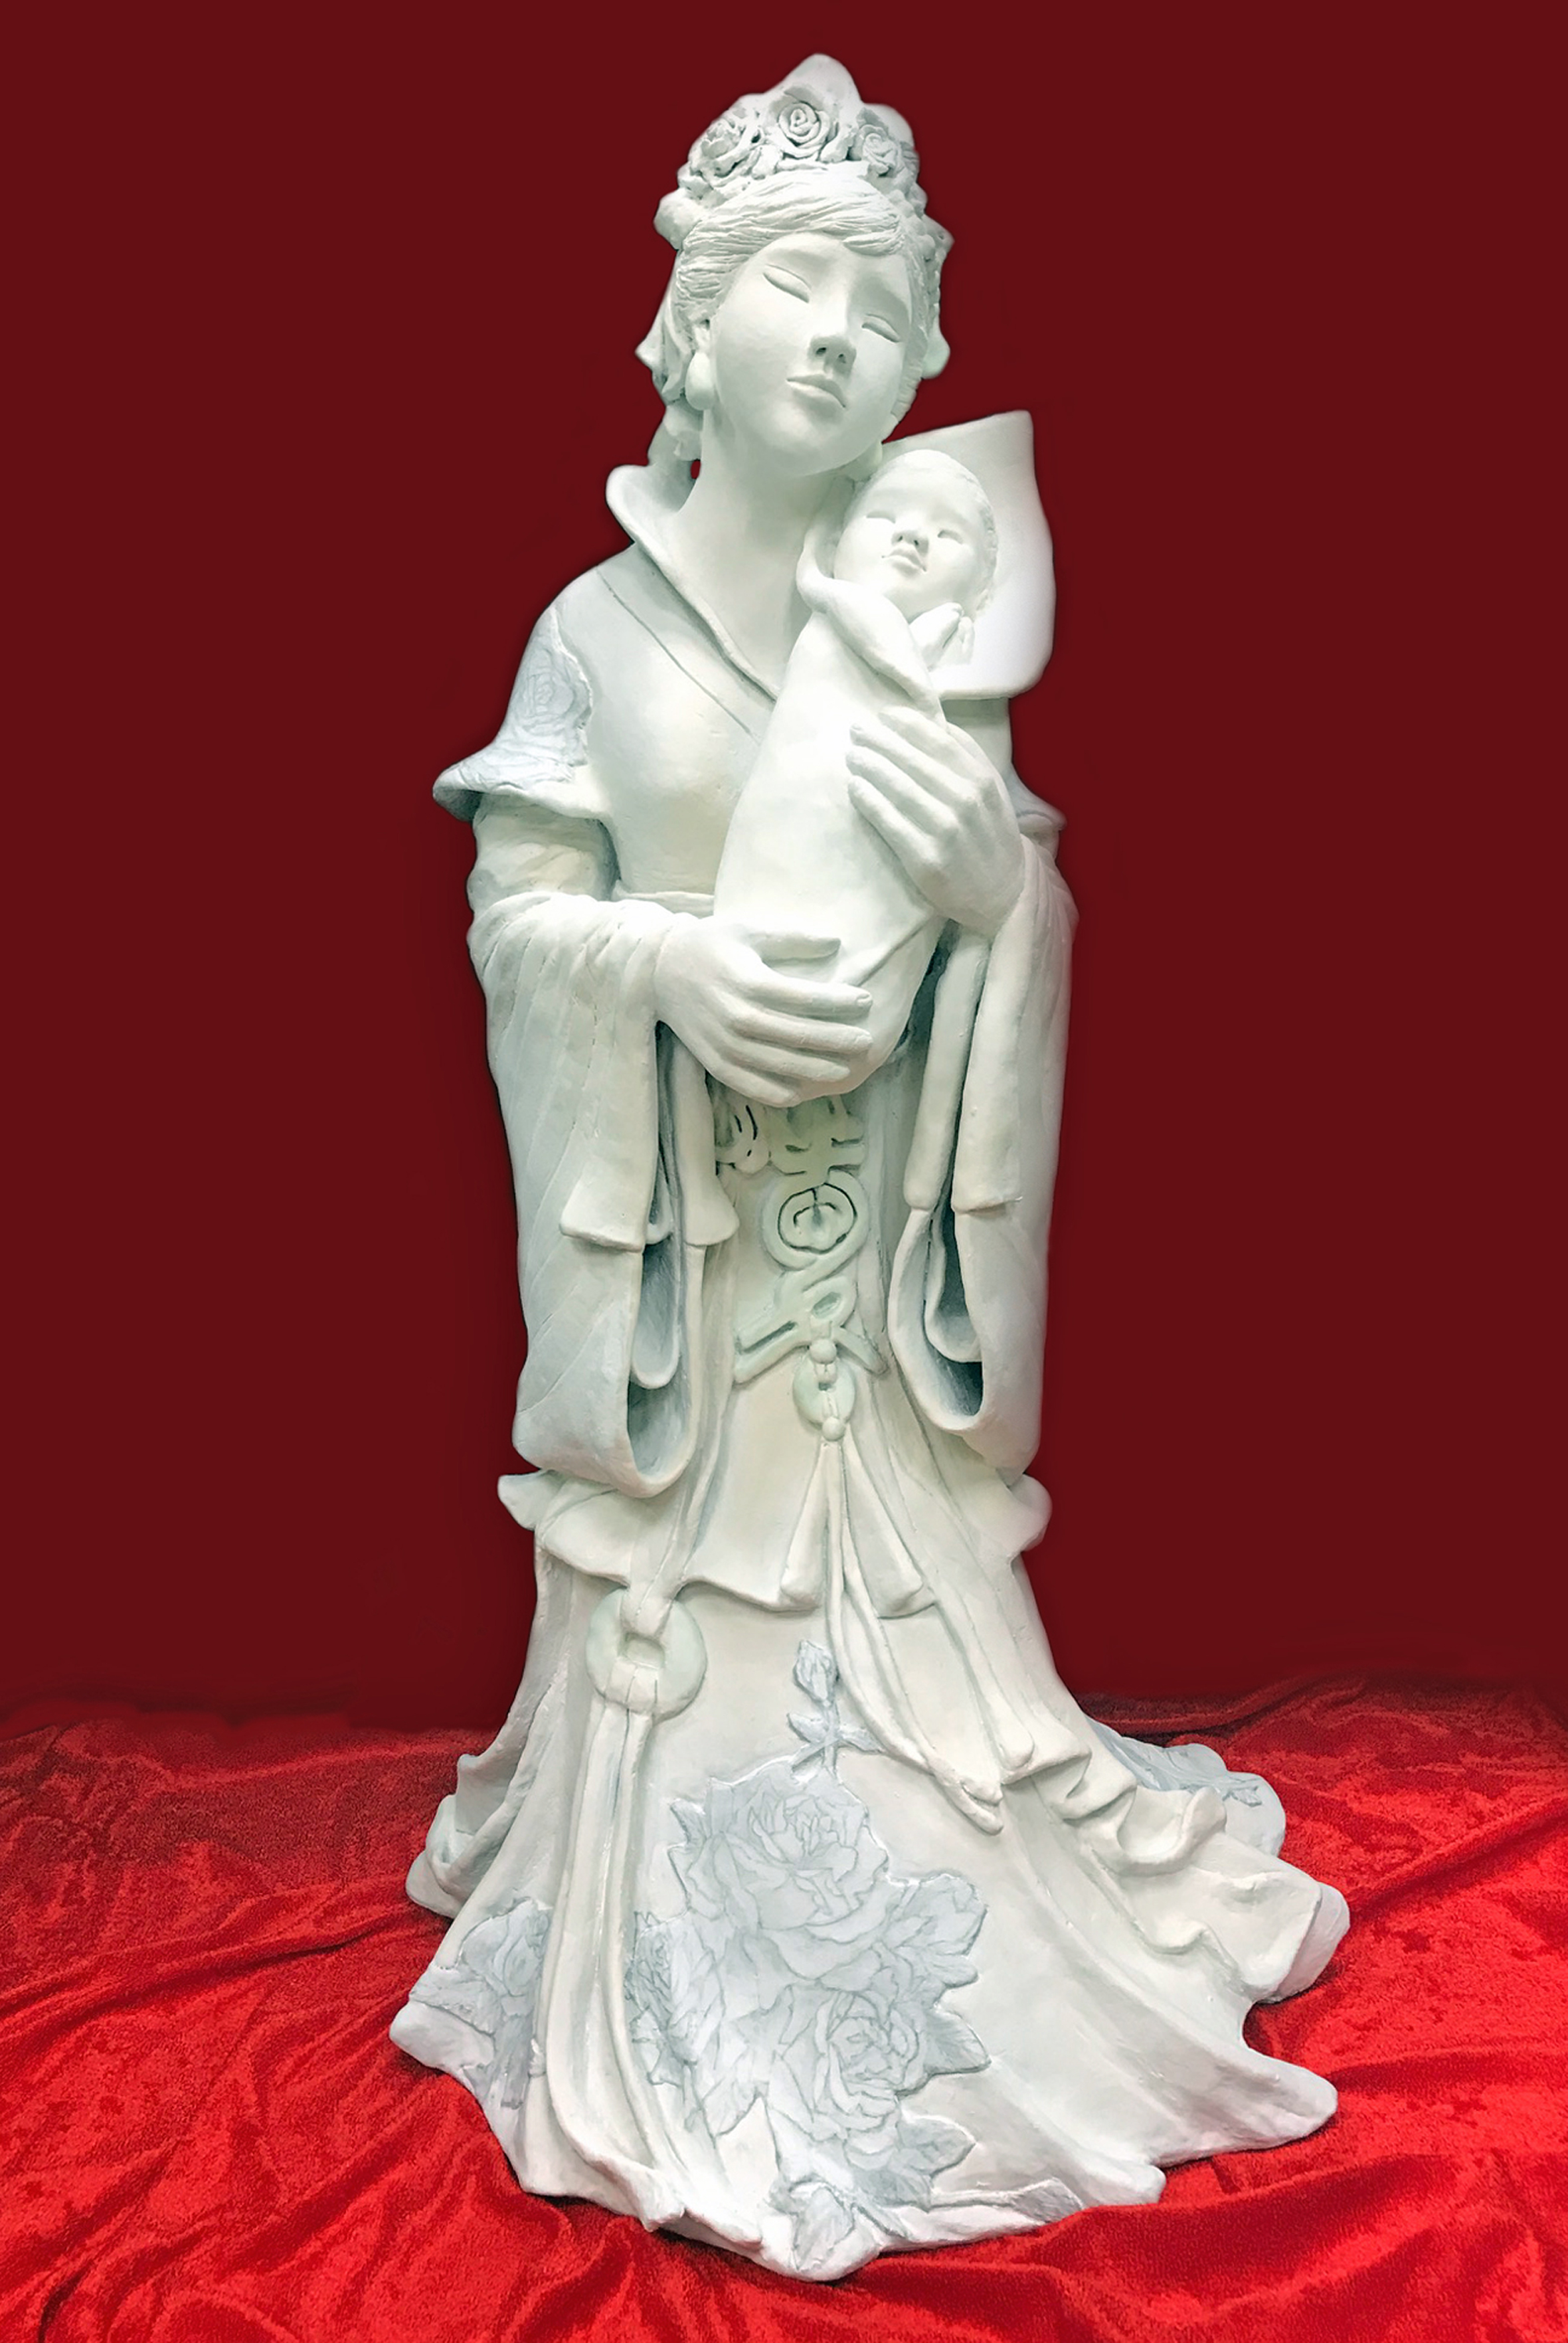 "Love and Grace" is a ceramic sculpture by Dr. Yufeng Wang.